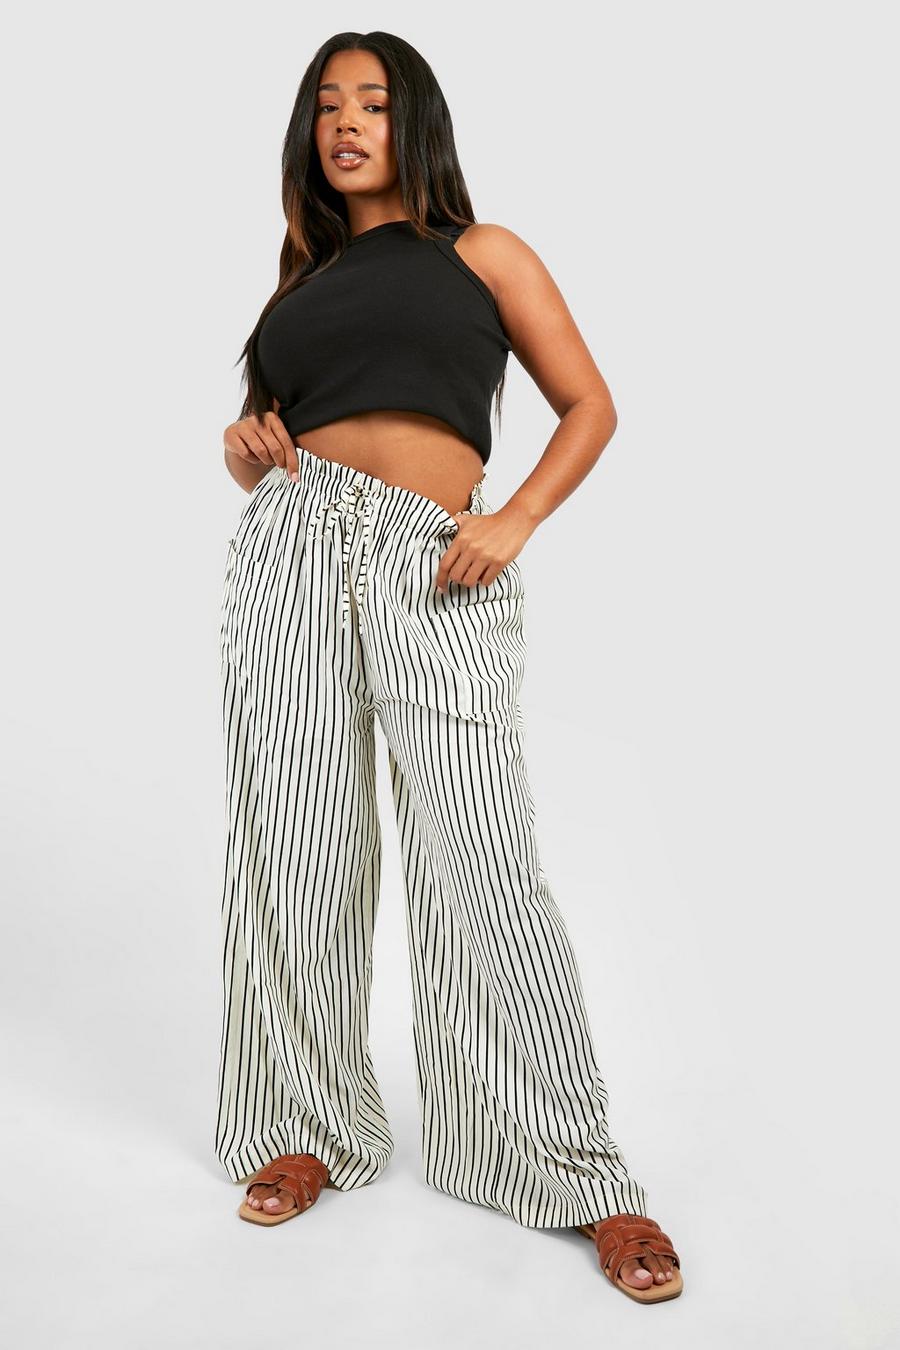 Horizontal Striped Pants, Wide Leg Trousers, Relaxed Fit, Joggers, Elastic  Waist, Culottes, Loungewear, Minimalists Outfits, Plus Size Pjs 